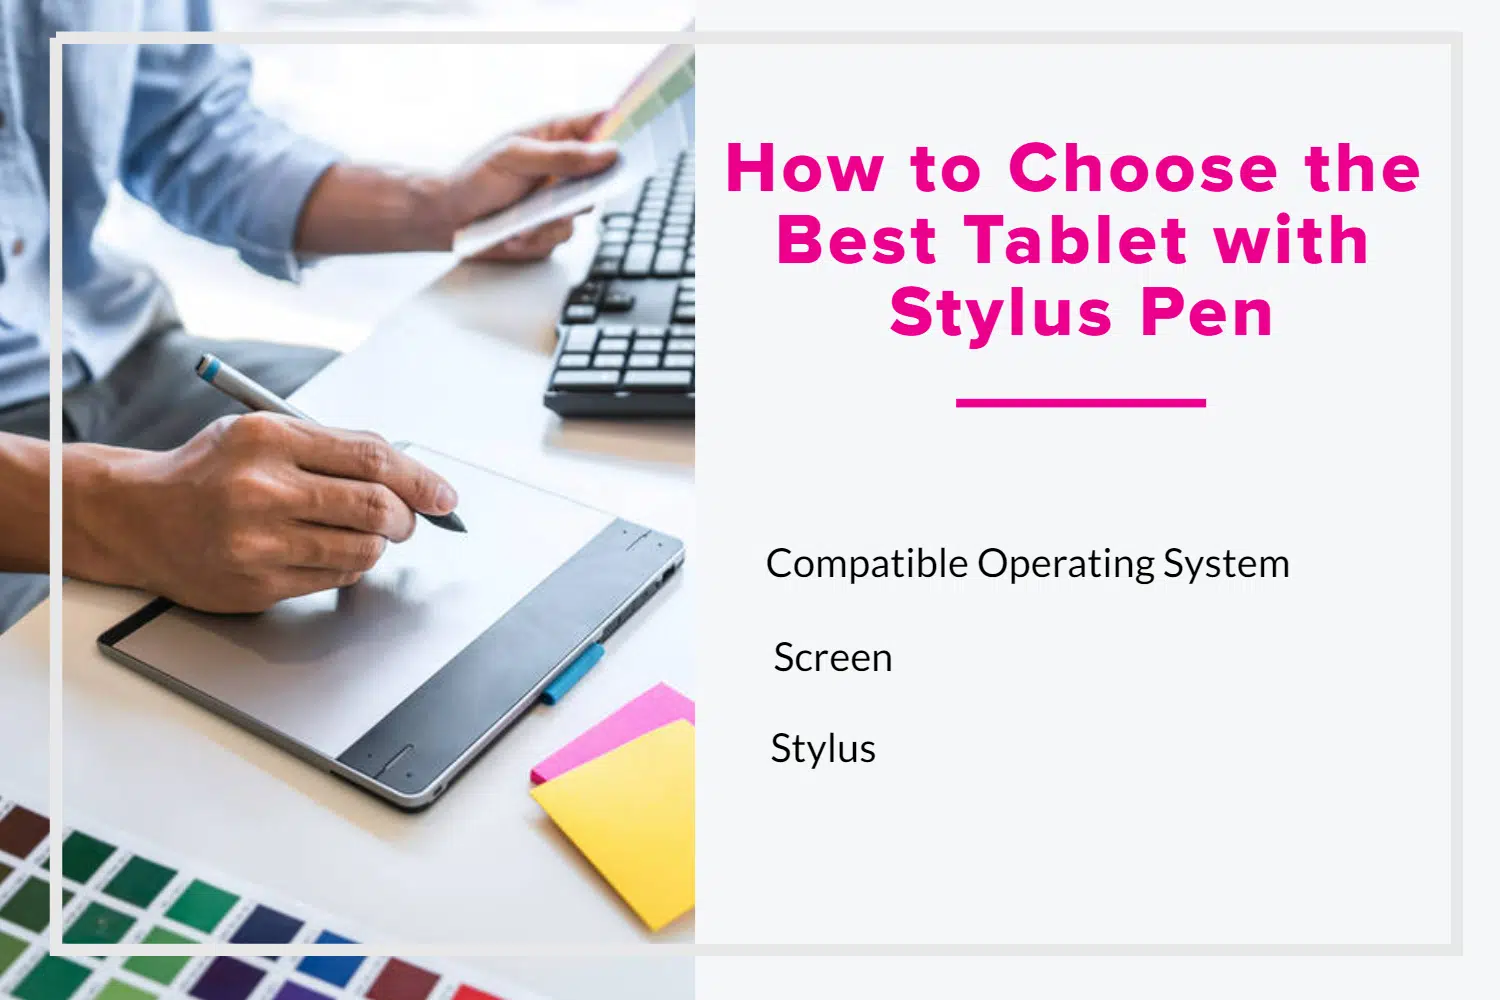 How to choose best tablet with stylus